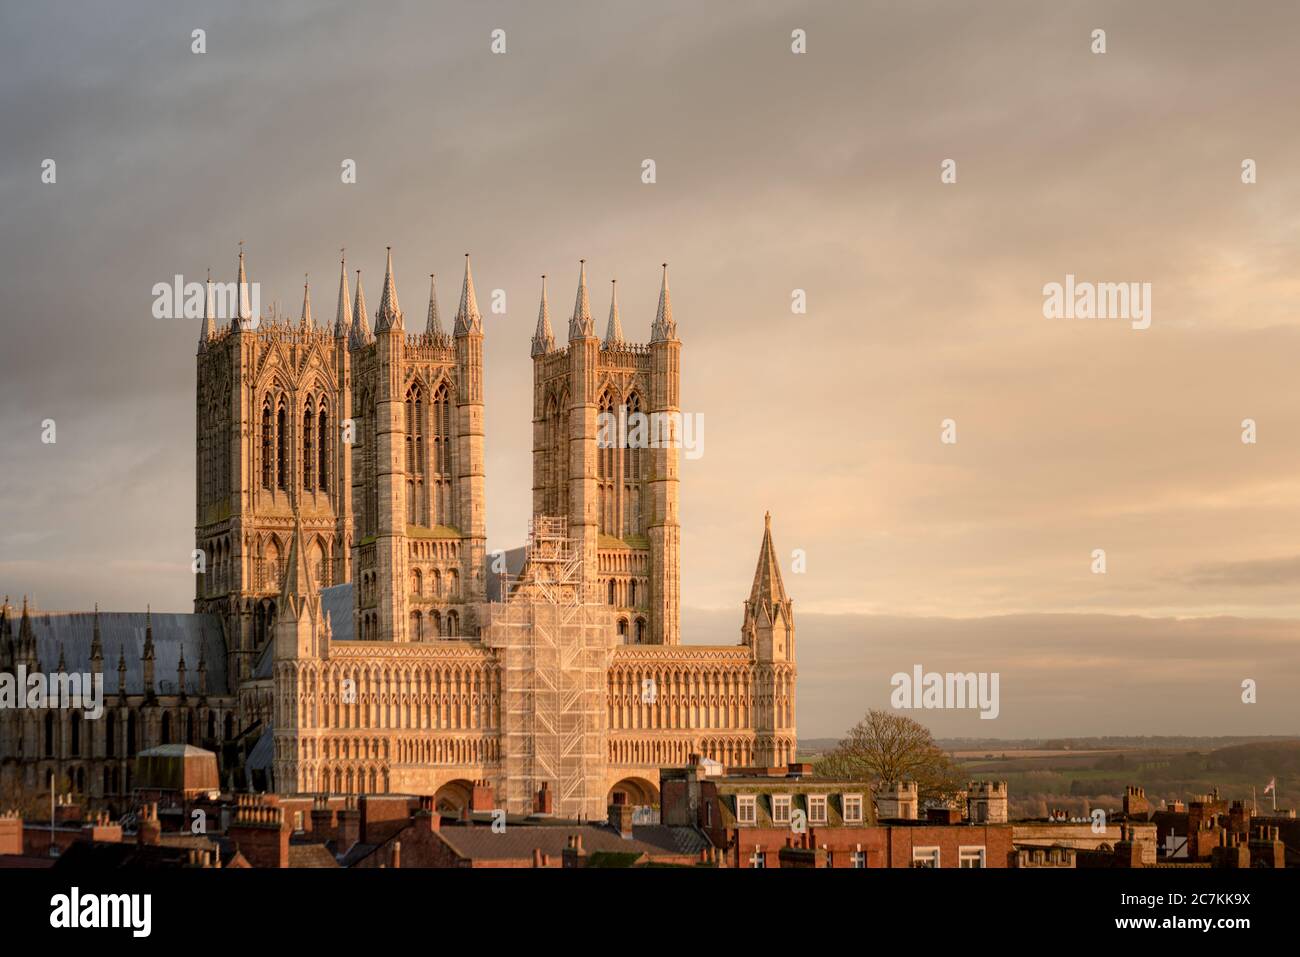 Mesmerizing view of the Lincoln Cathedral in the UK on a rainy day Stock Photo